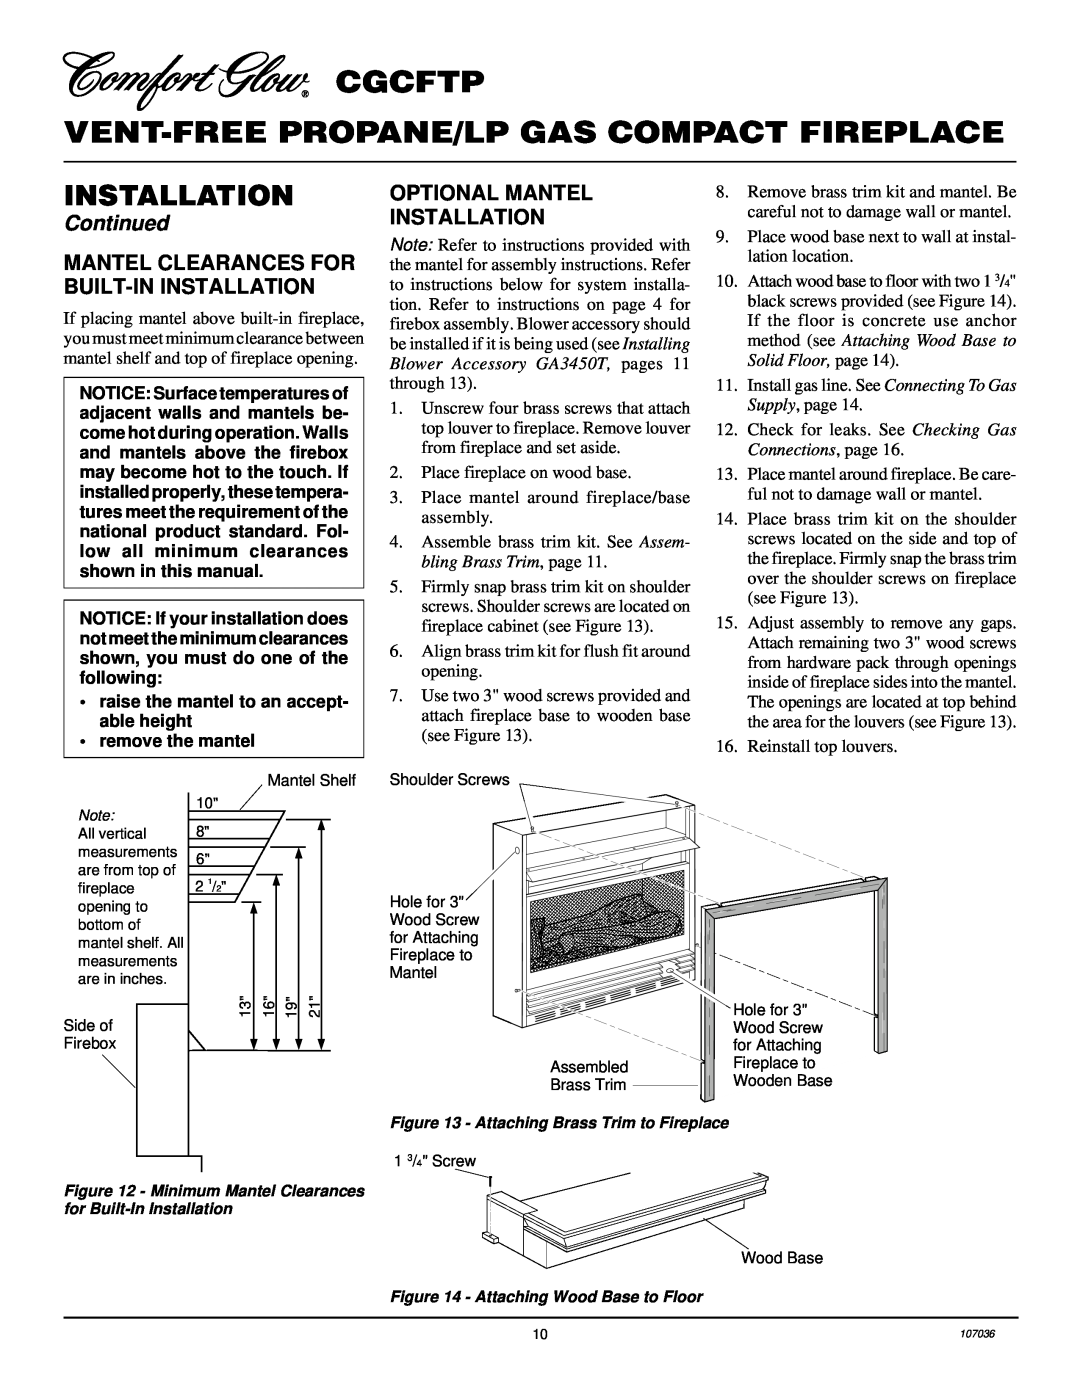 Desa 000 to 26, CGCFTP 14 Mantel Clearances For Built-Ininstallation, Optional Mantel Installation, Continued 